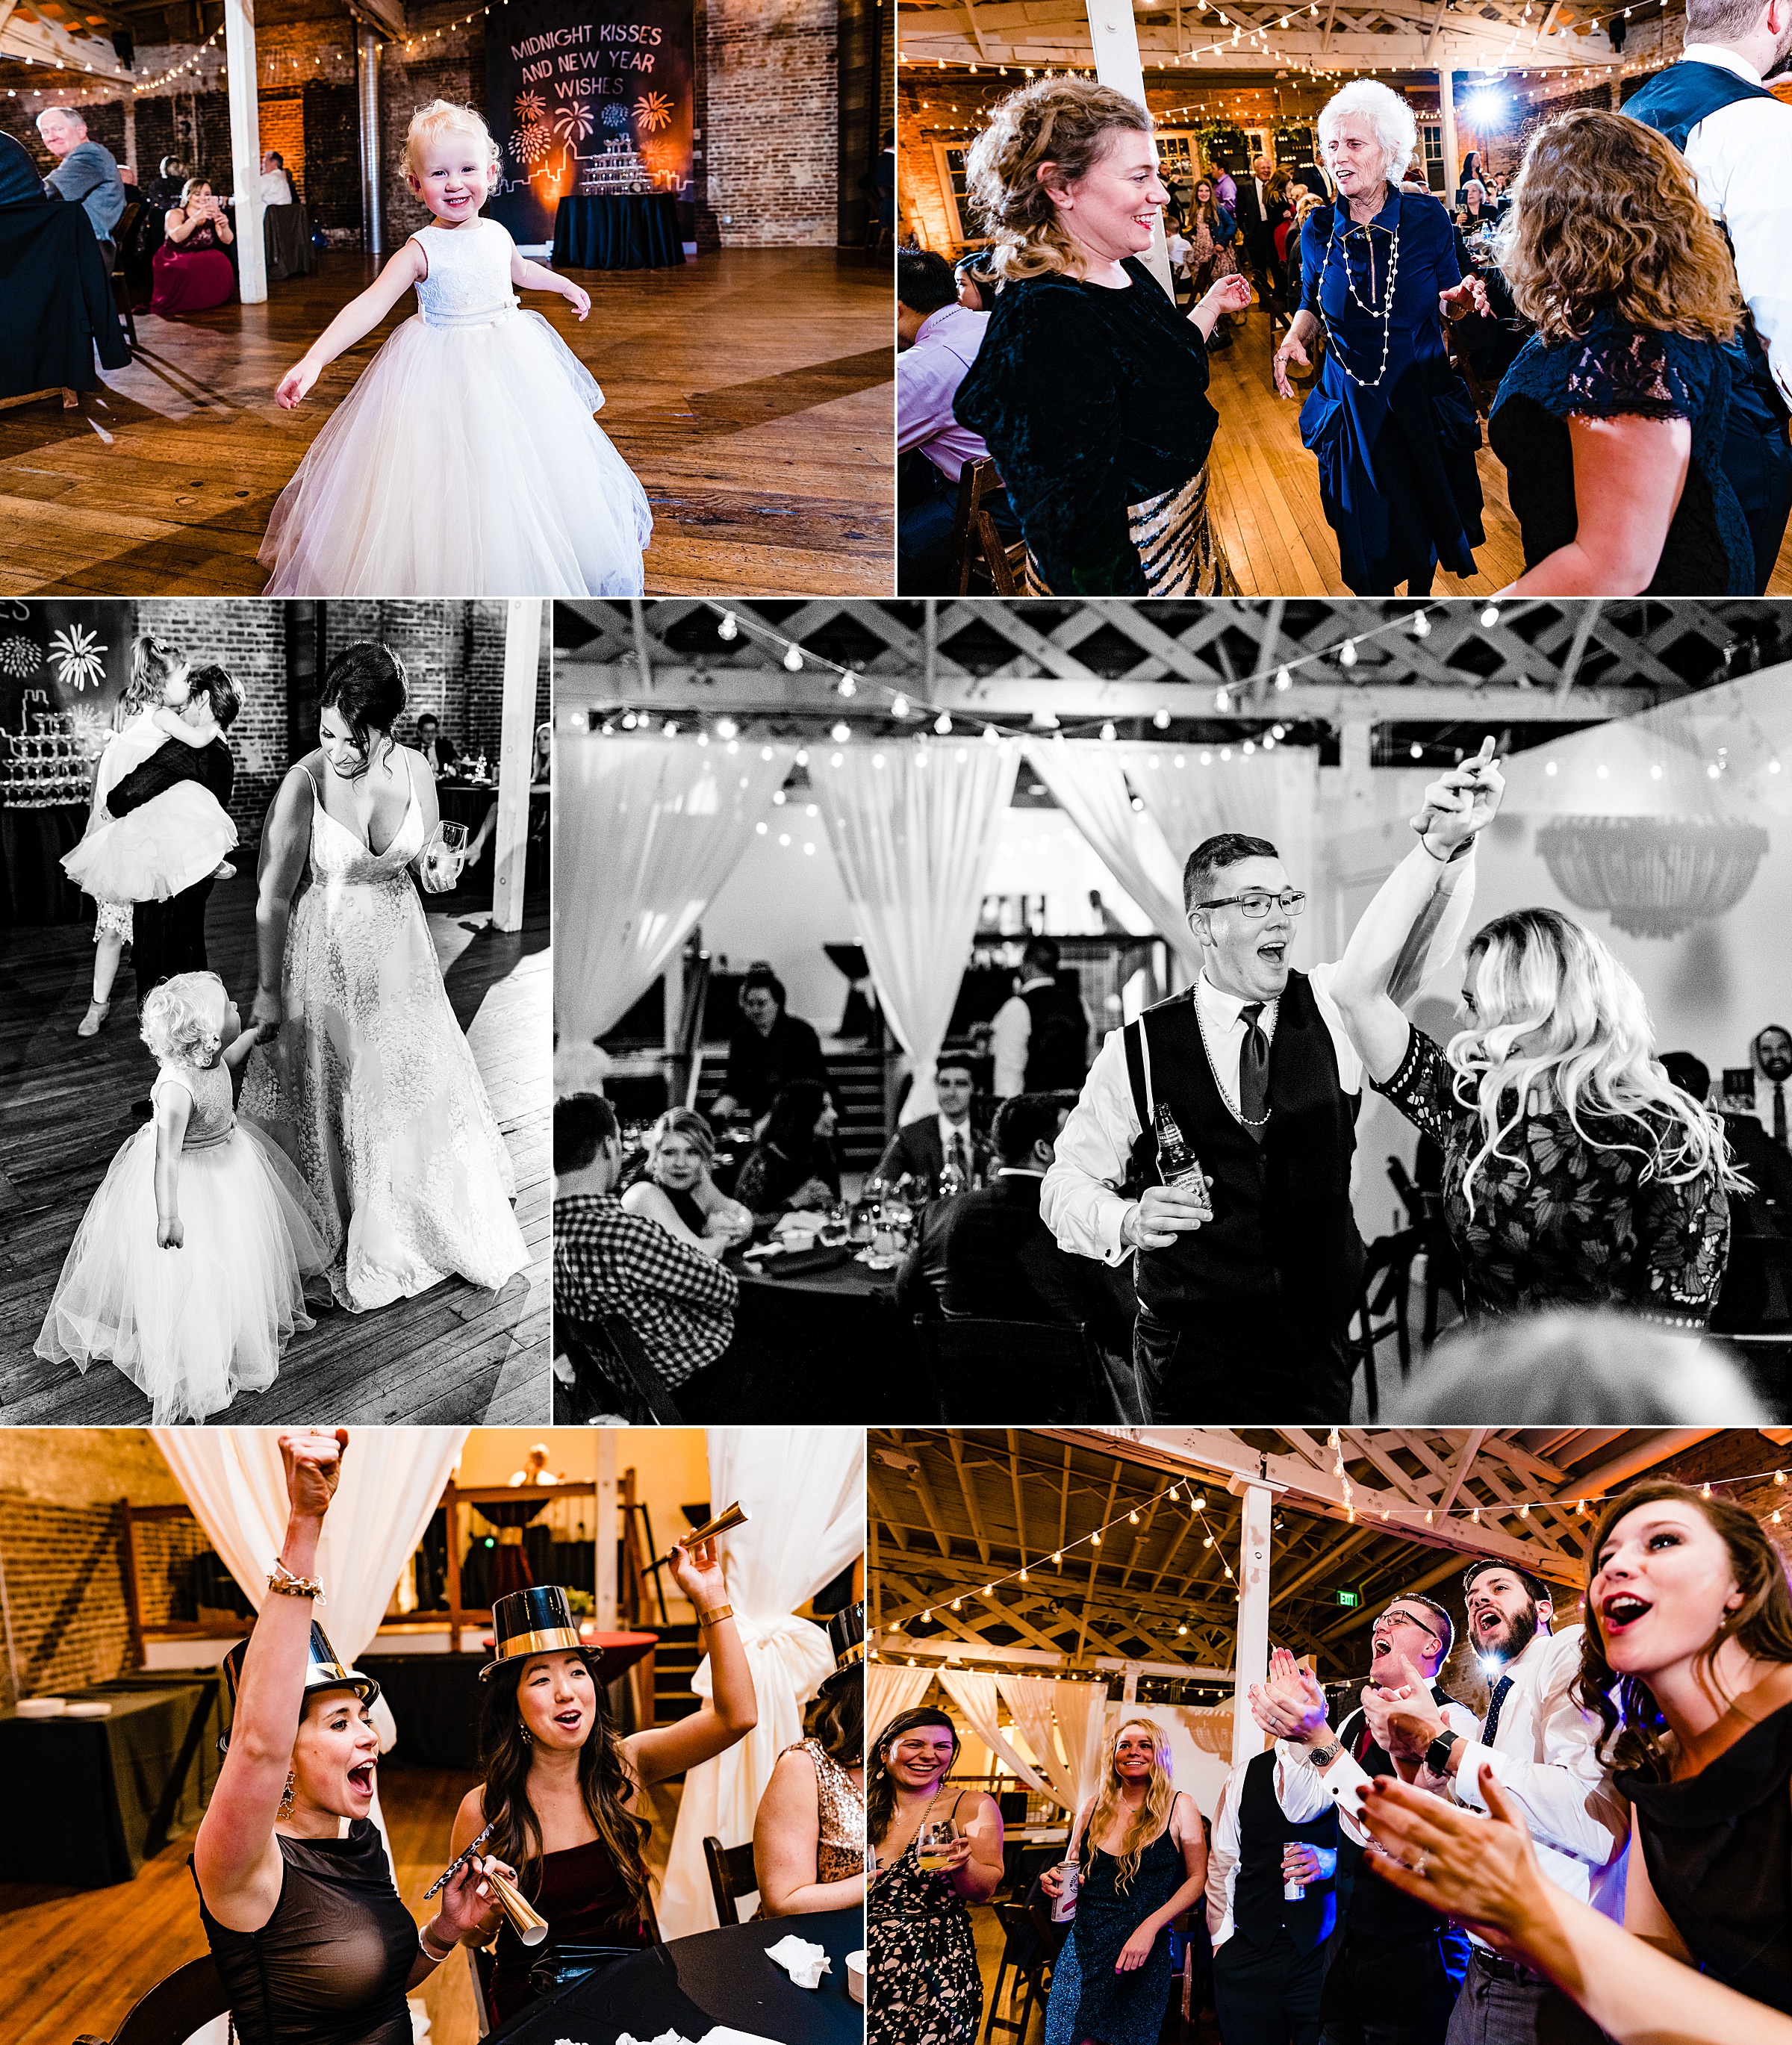 Wedding reception dancing at the Stockroom at 230 from Raleigh wedding photographers